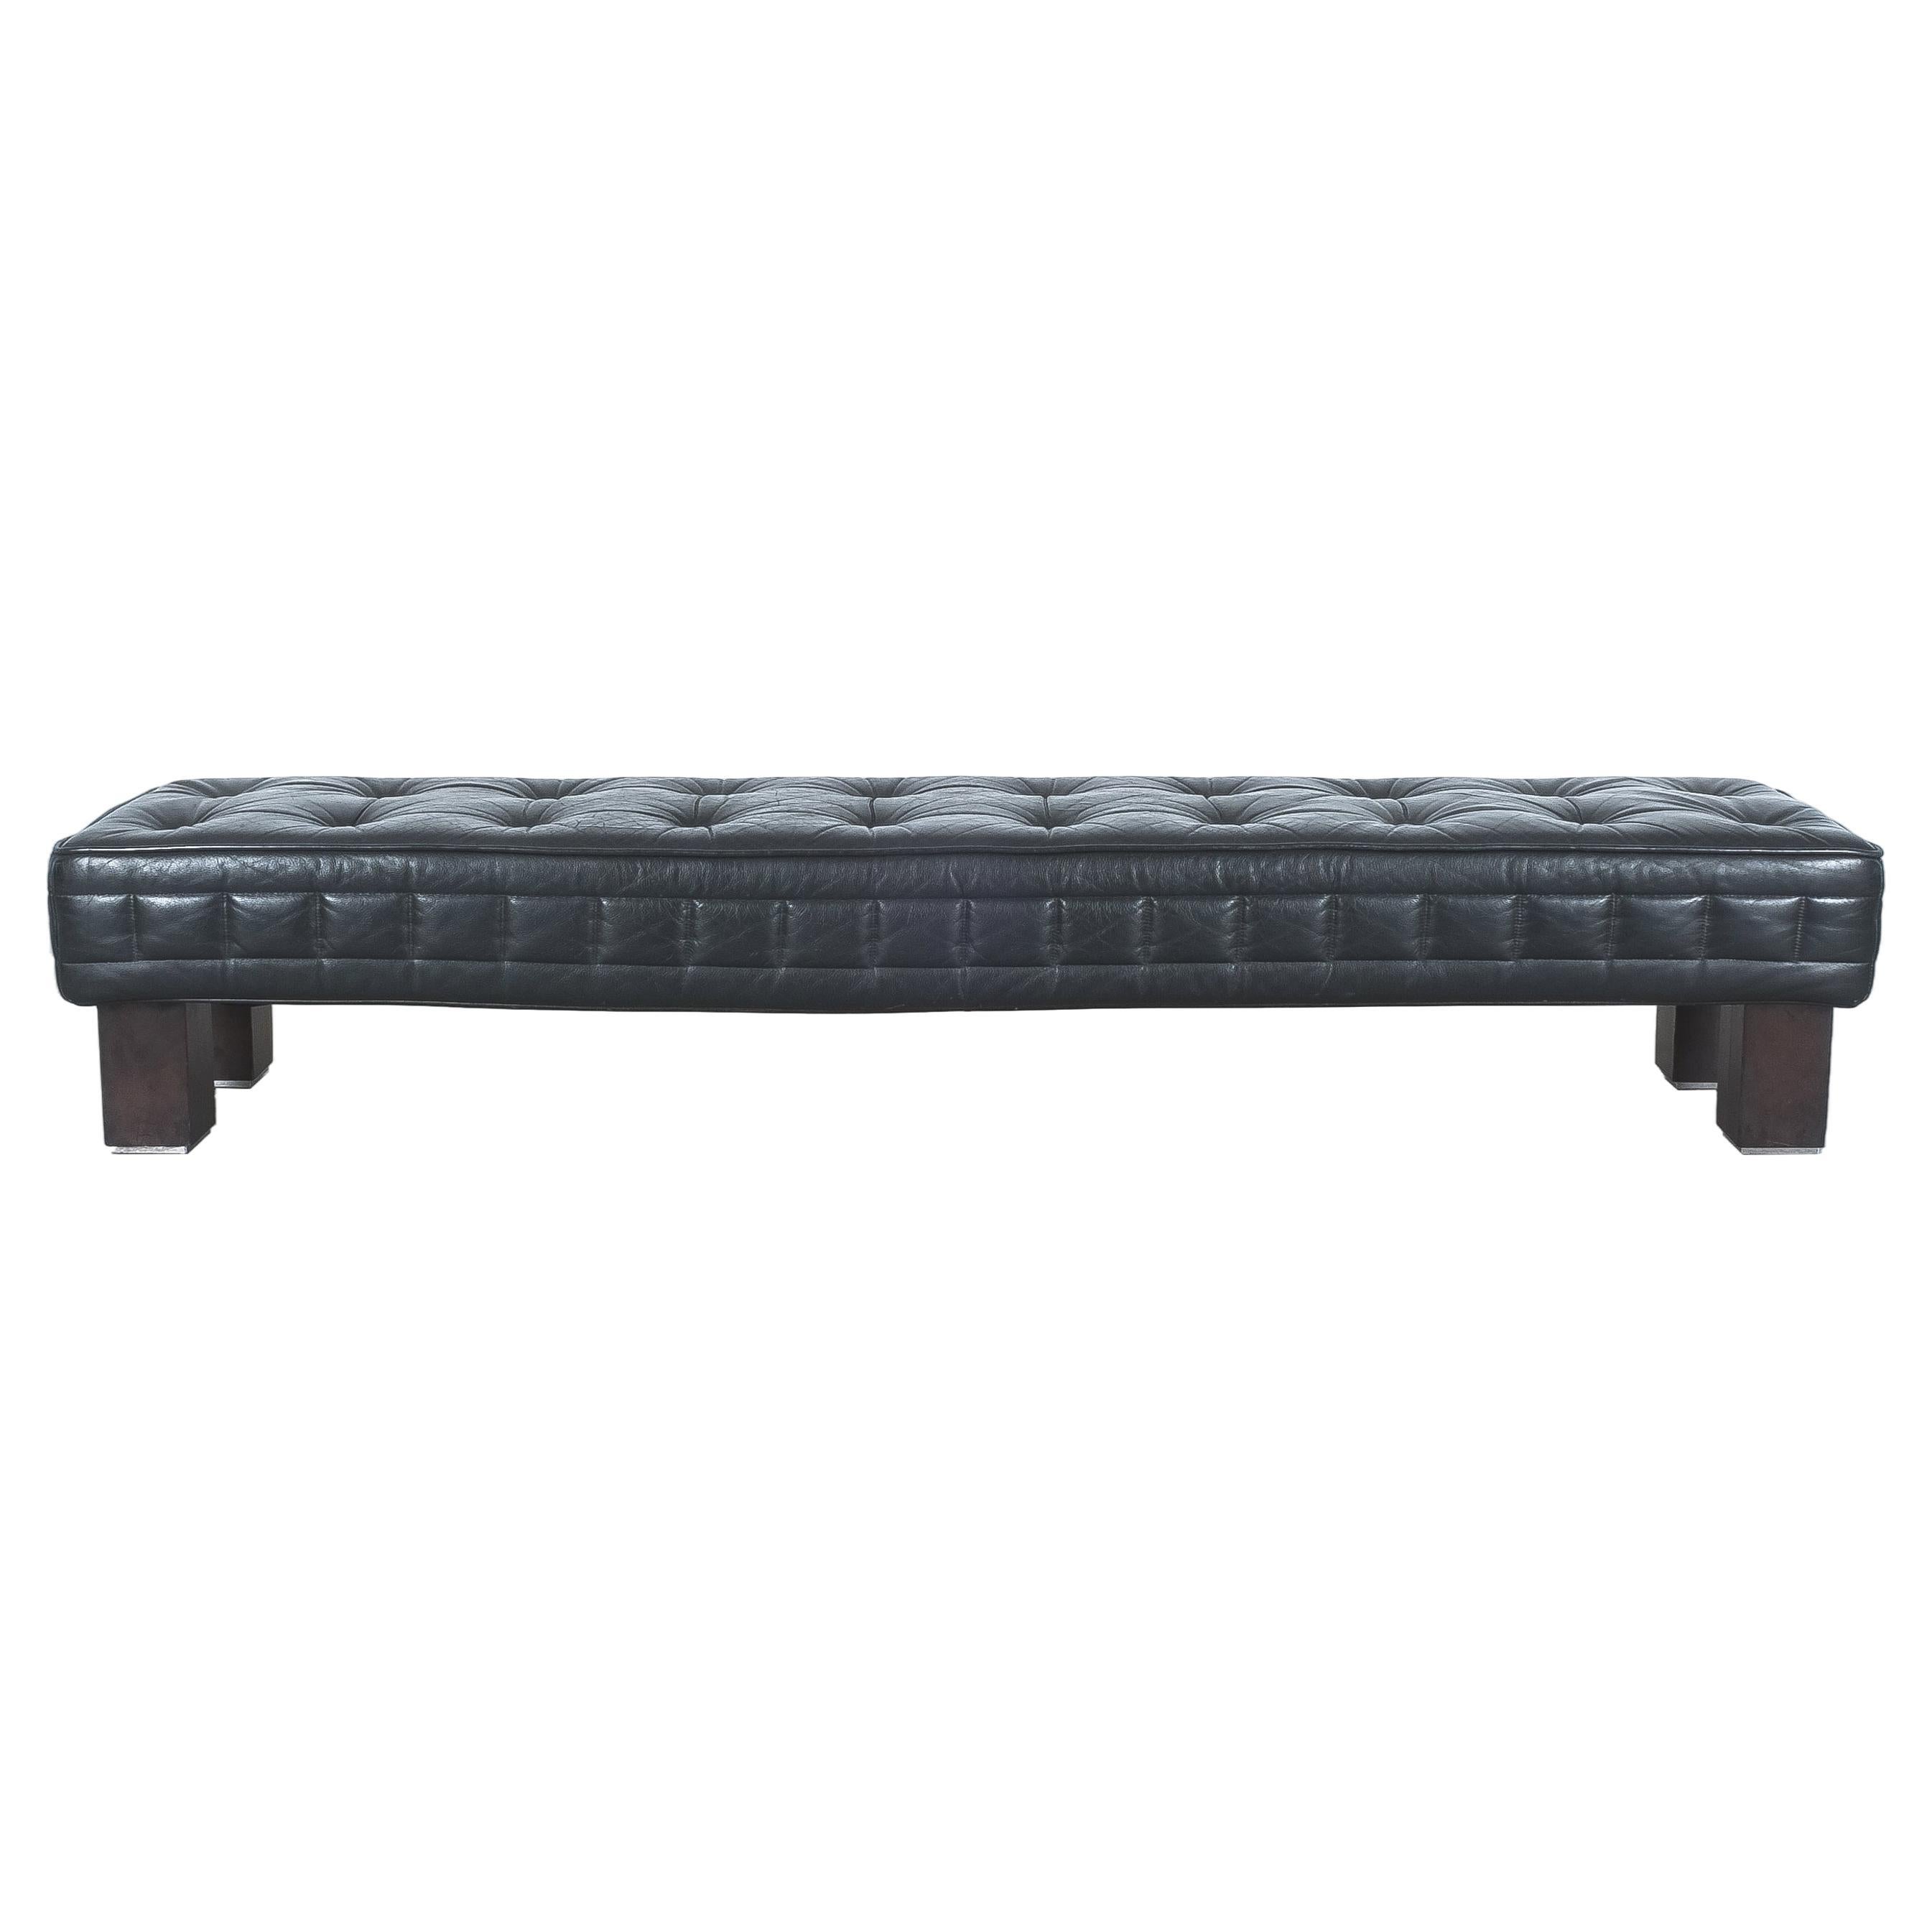 Matteo Thun Tufted Black Leather Banquettes (2 pieces) Bench Materassi, Wittmann